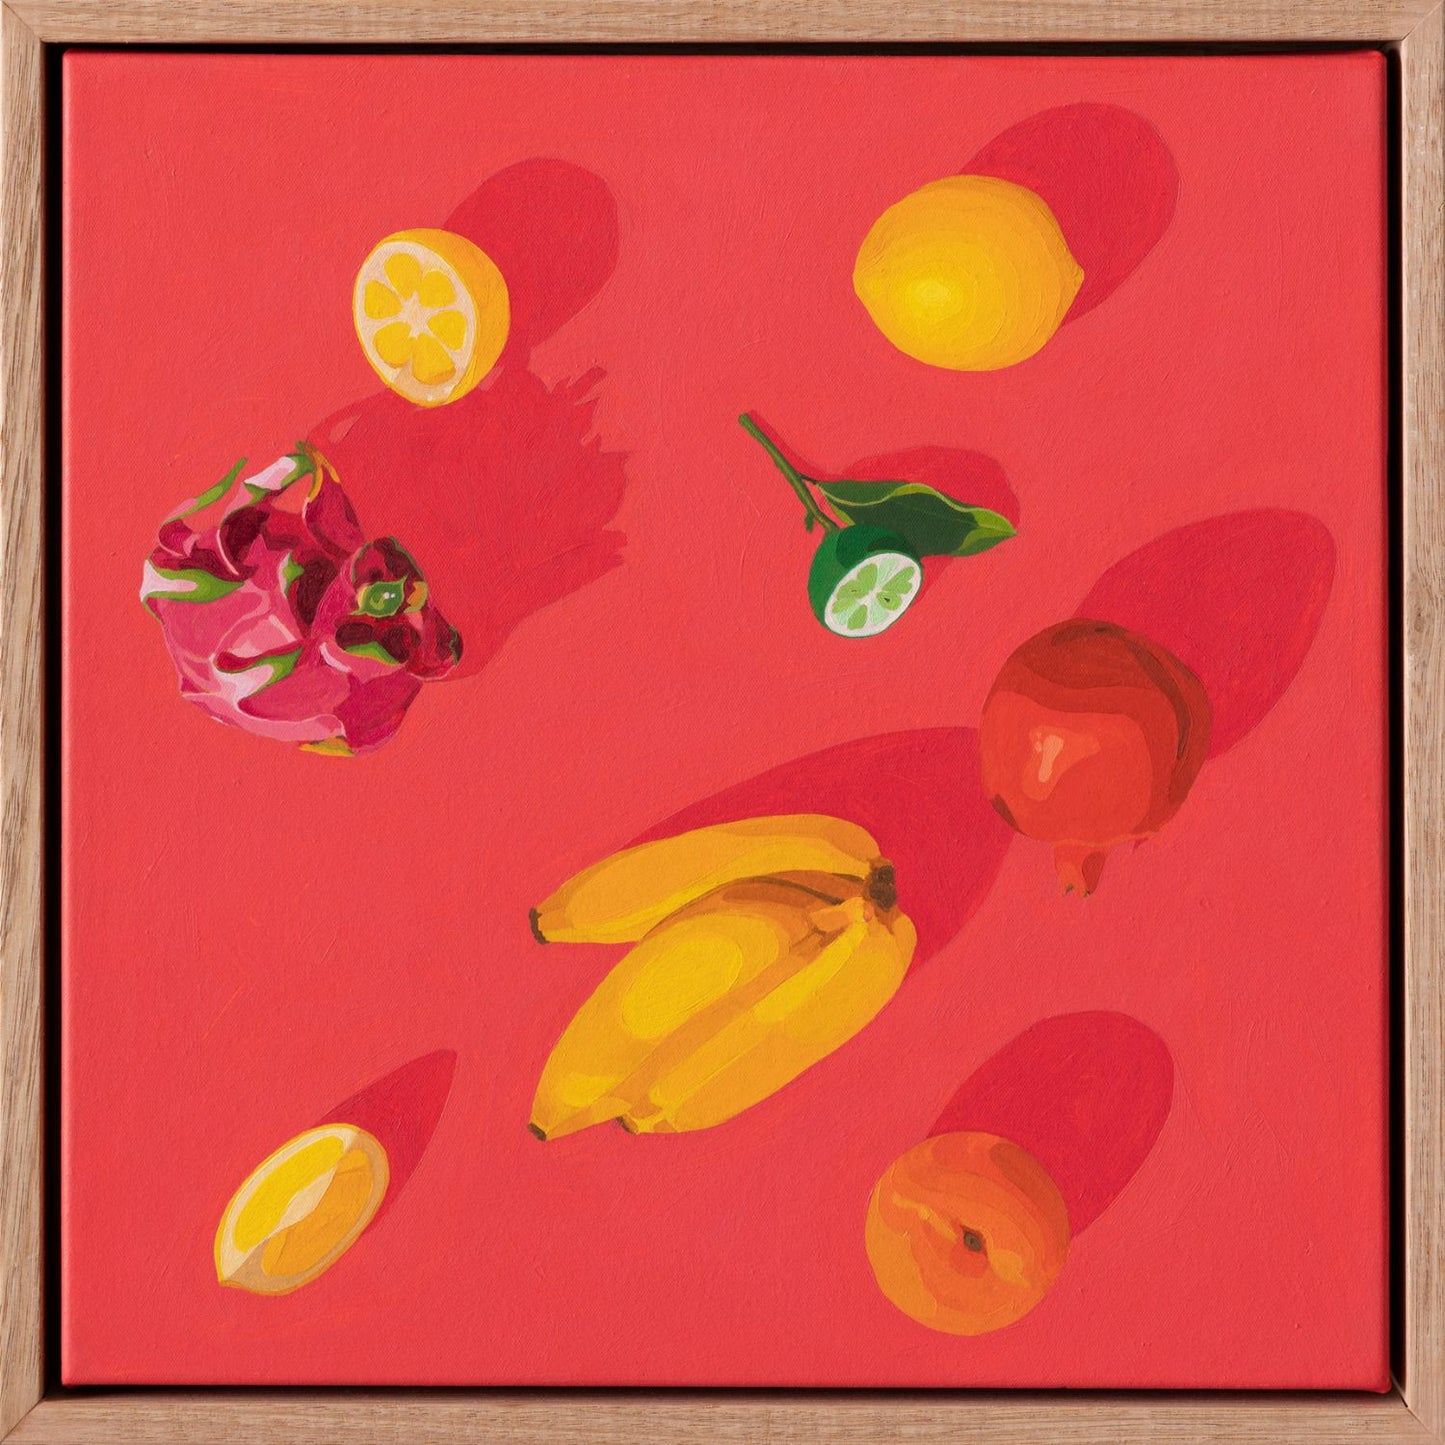 original oil painting of fresh fruits like bananas, lemons, dragonfruit, pomegranate, lime and apricot on a vibrant and bright red background with beautiful shadows